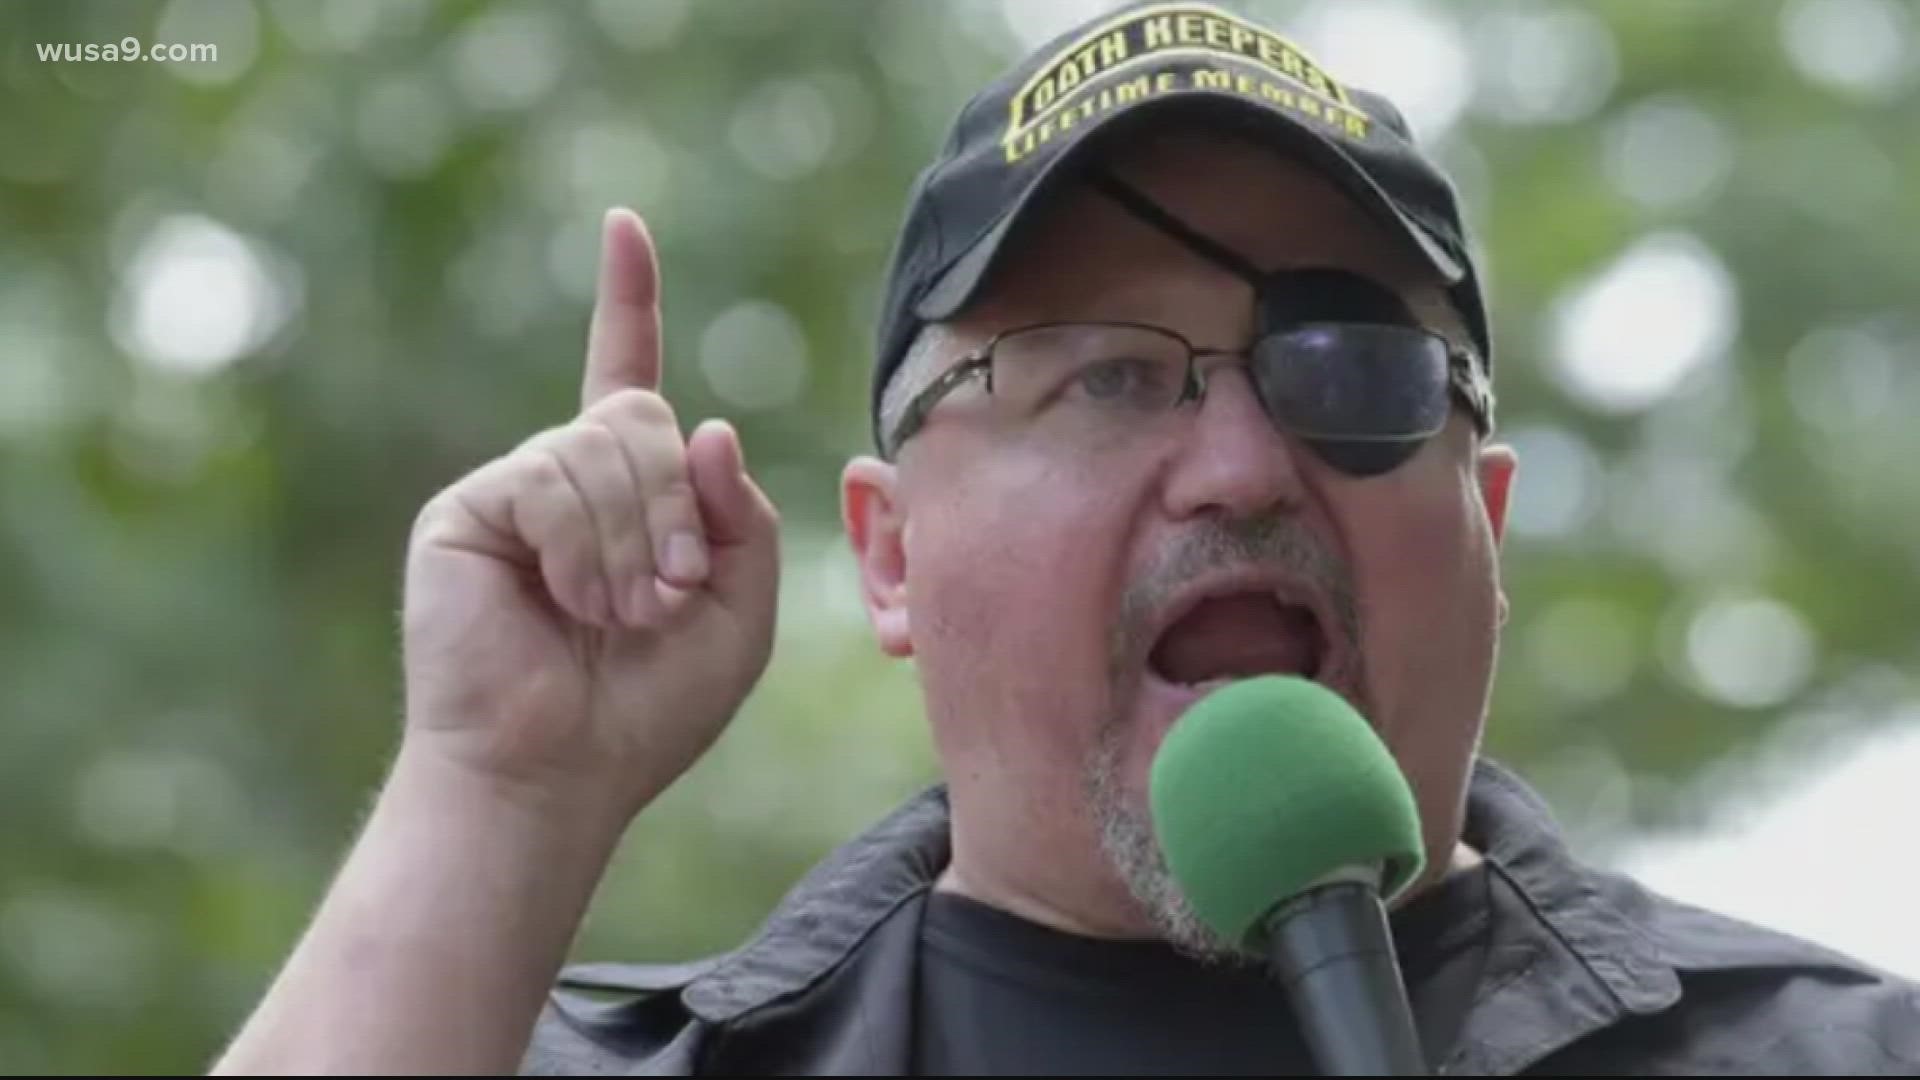 Stewart Rhodes is the founder and leader of the extremist Militia the Oath Keepers.